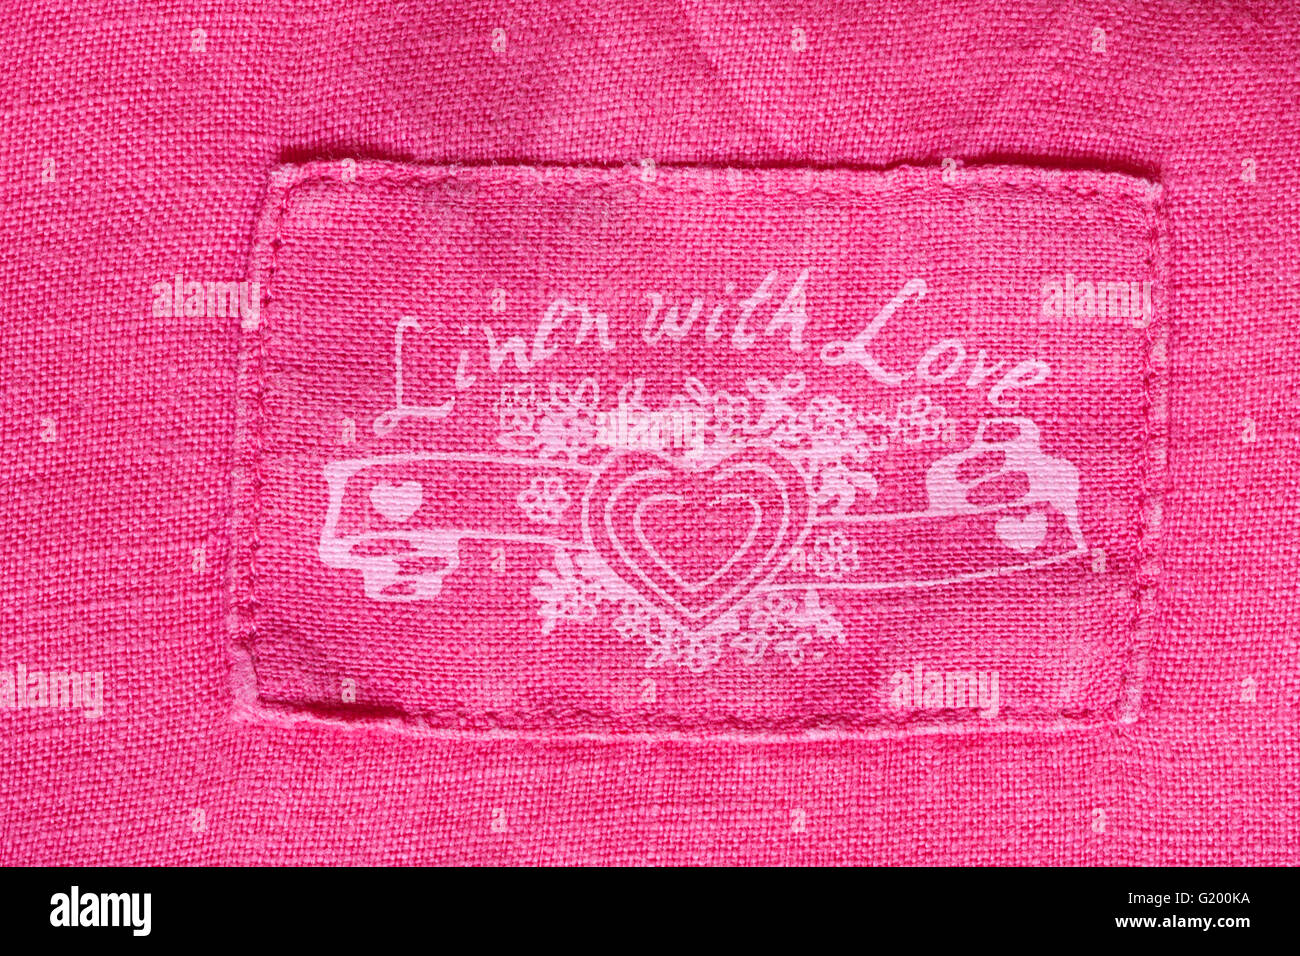 Linen with Love stamp in Marks & Spencer woman's pink blouse clothing garment Stock Photo